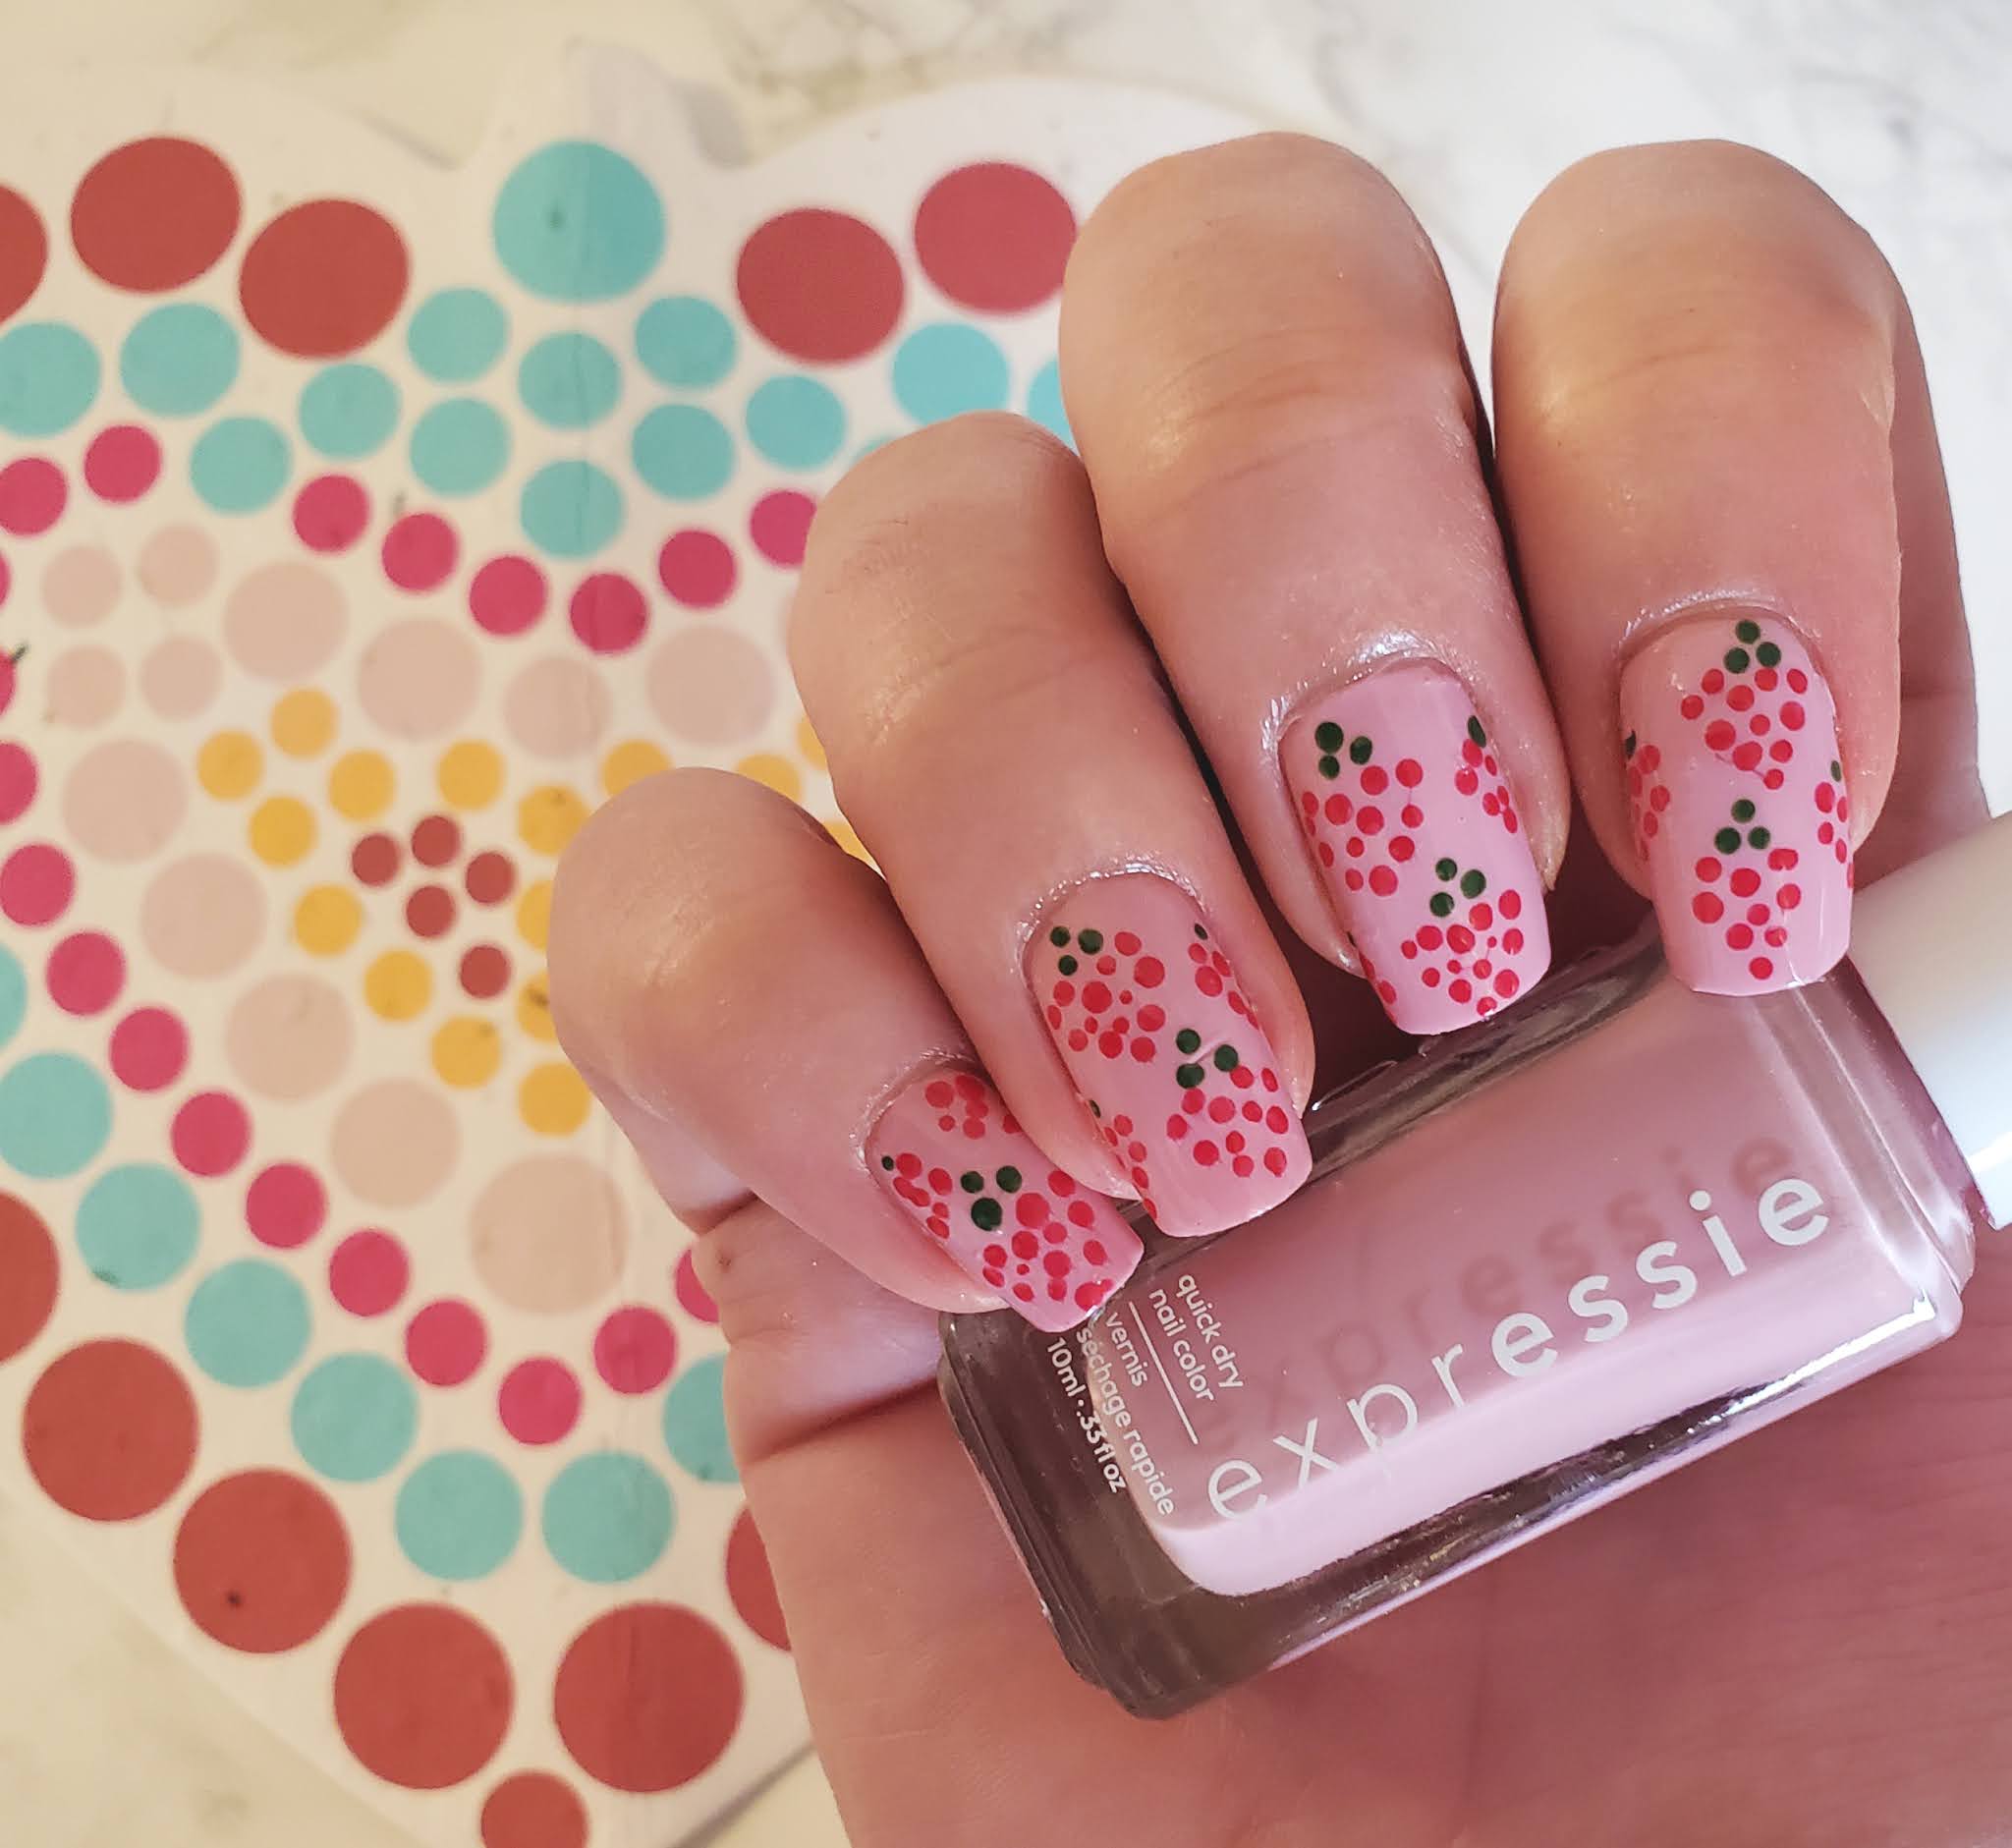 Manicure Tuesday - Heart Berry Nails